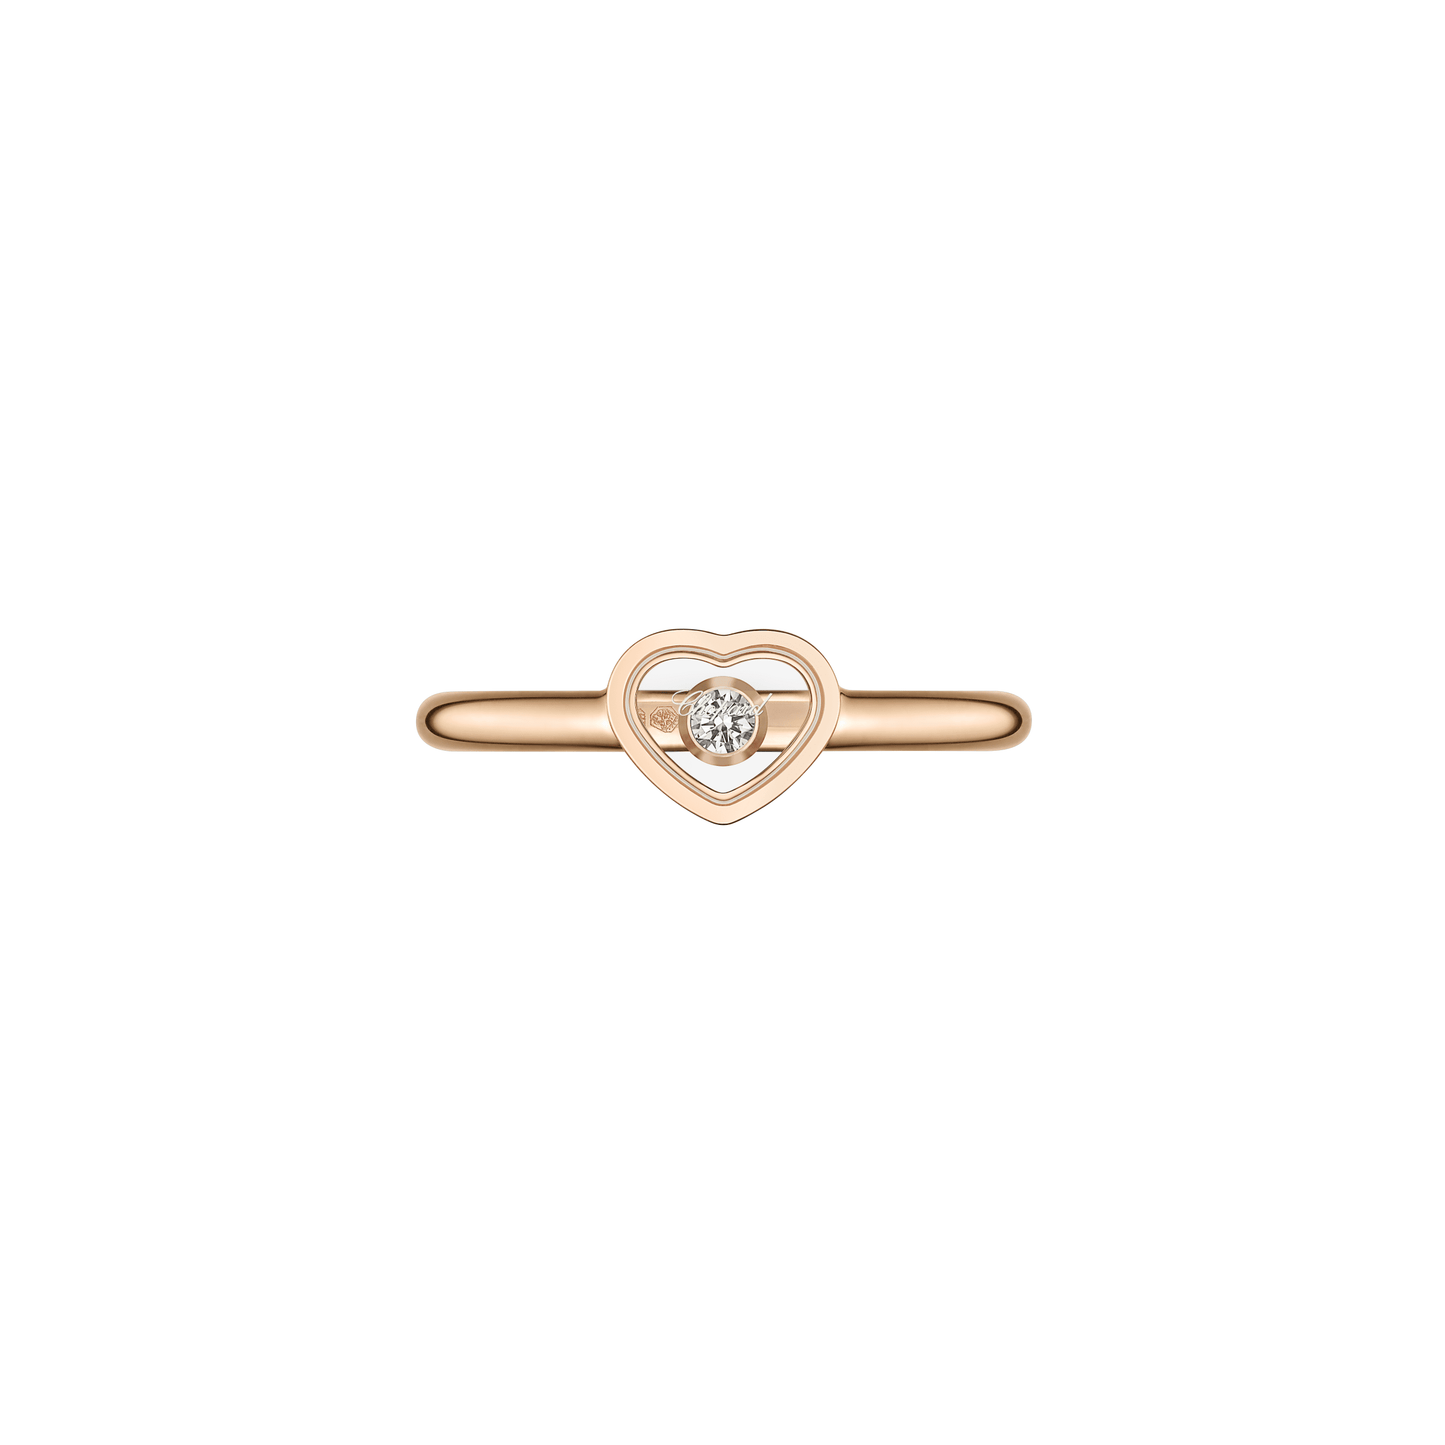 MY HAPPY HEARTS RING, ETHICAL ROSE GOLD, DIAMOND 82A086-5000